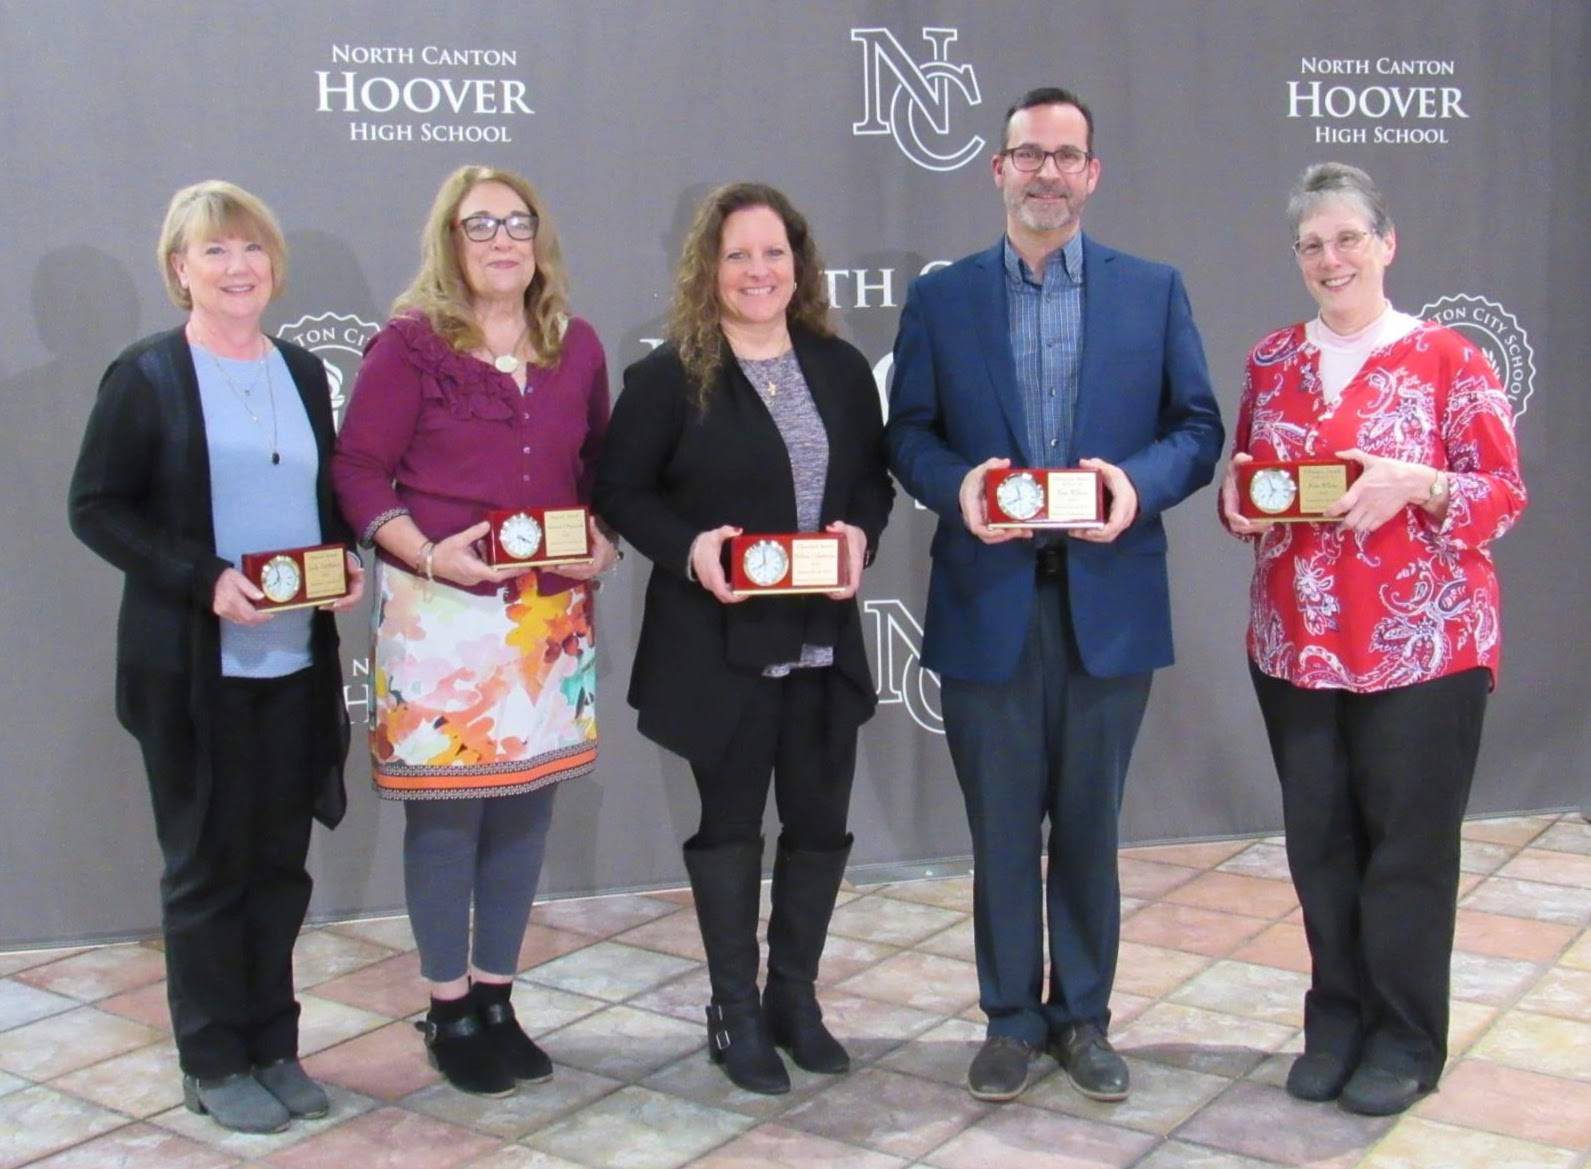 Four women and one man holding awards